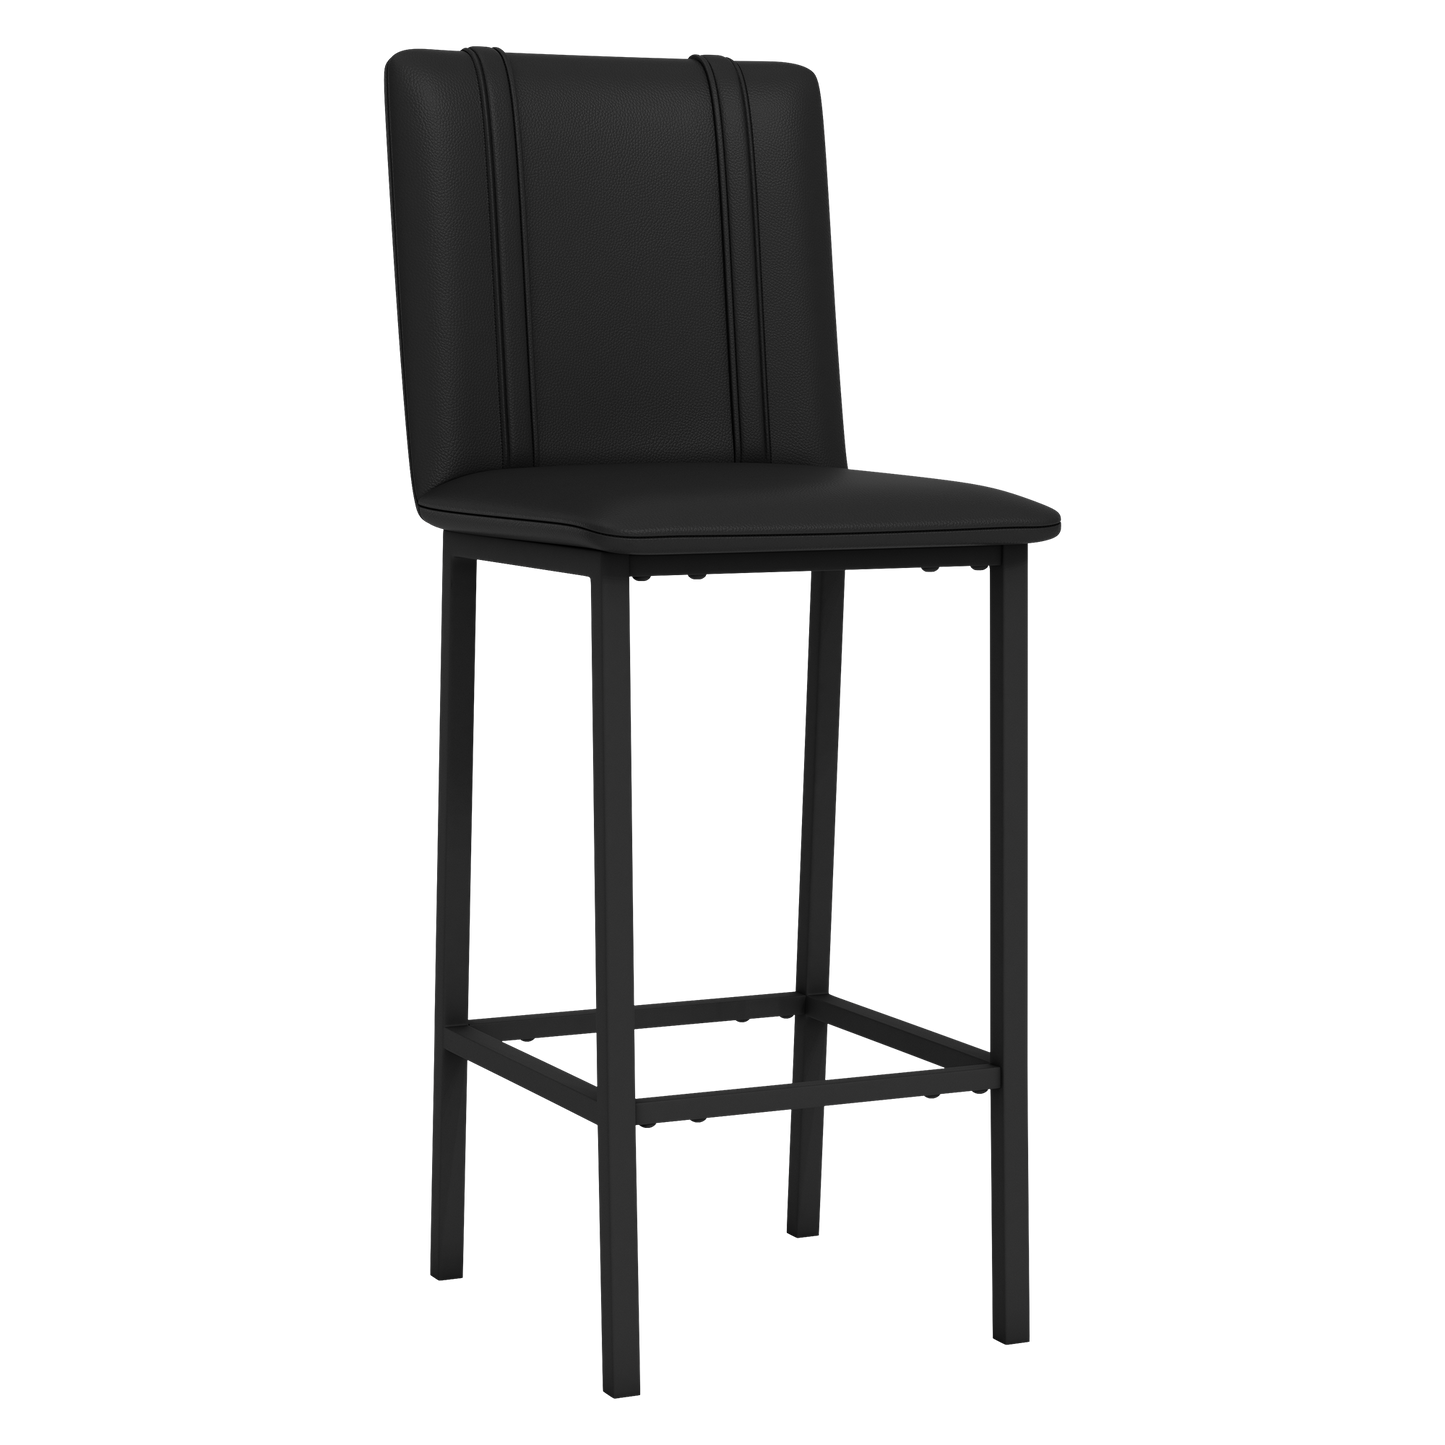 Bar Stool 500 with Tampa Bay Buccaneers Secondary Logo Set of 2